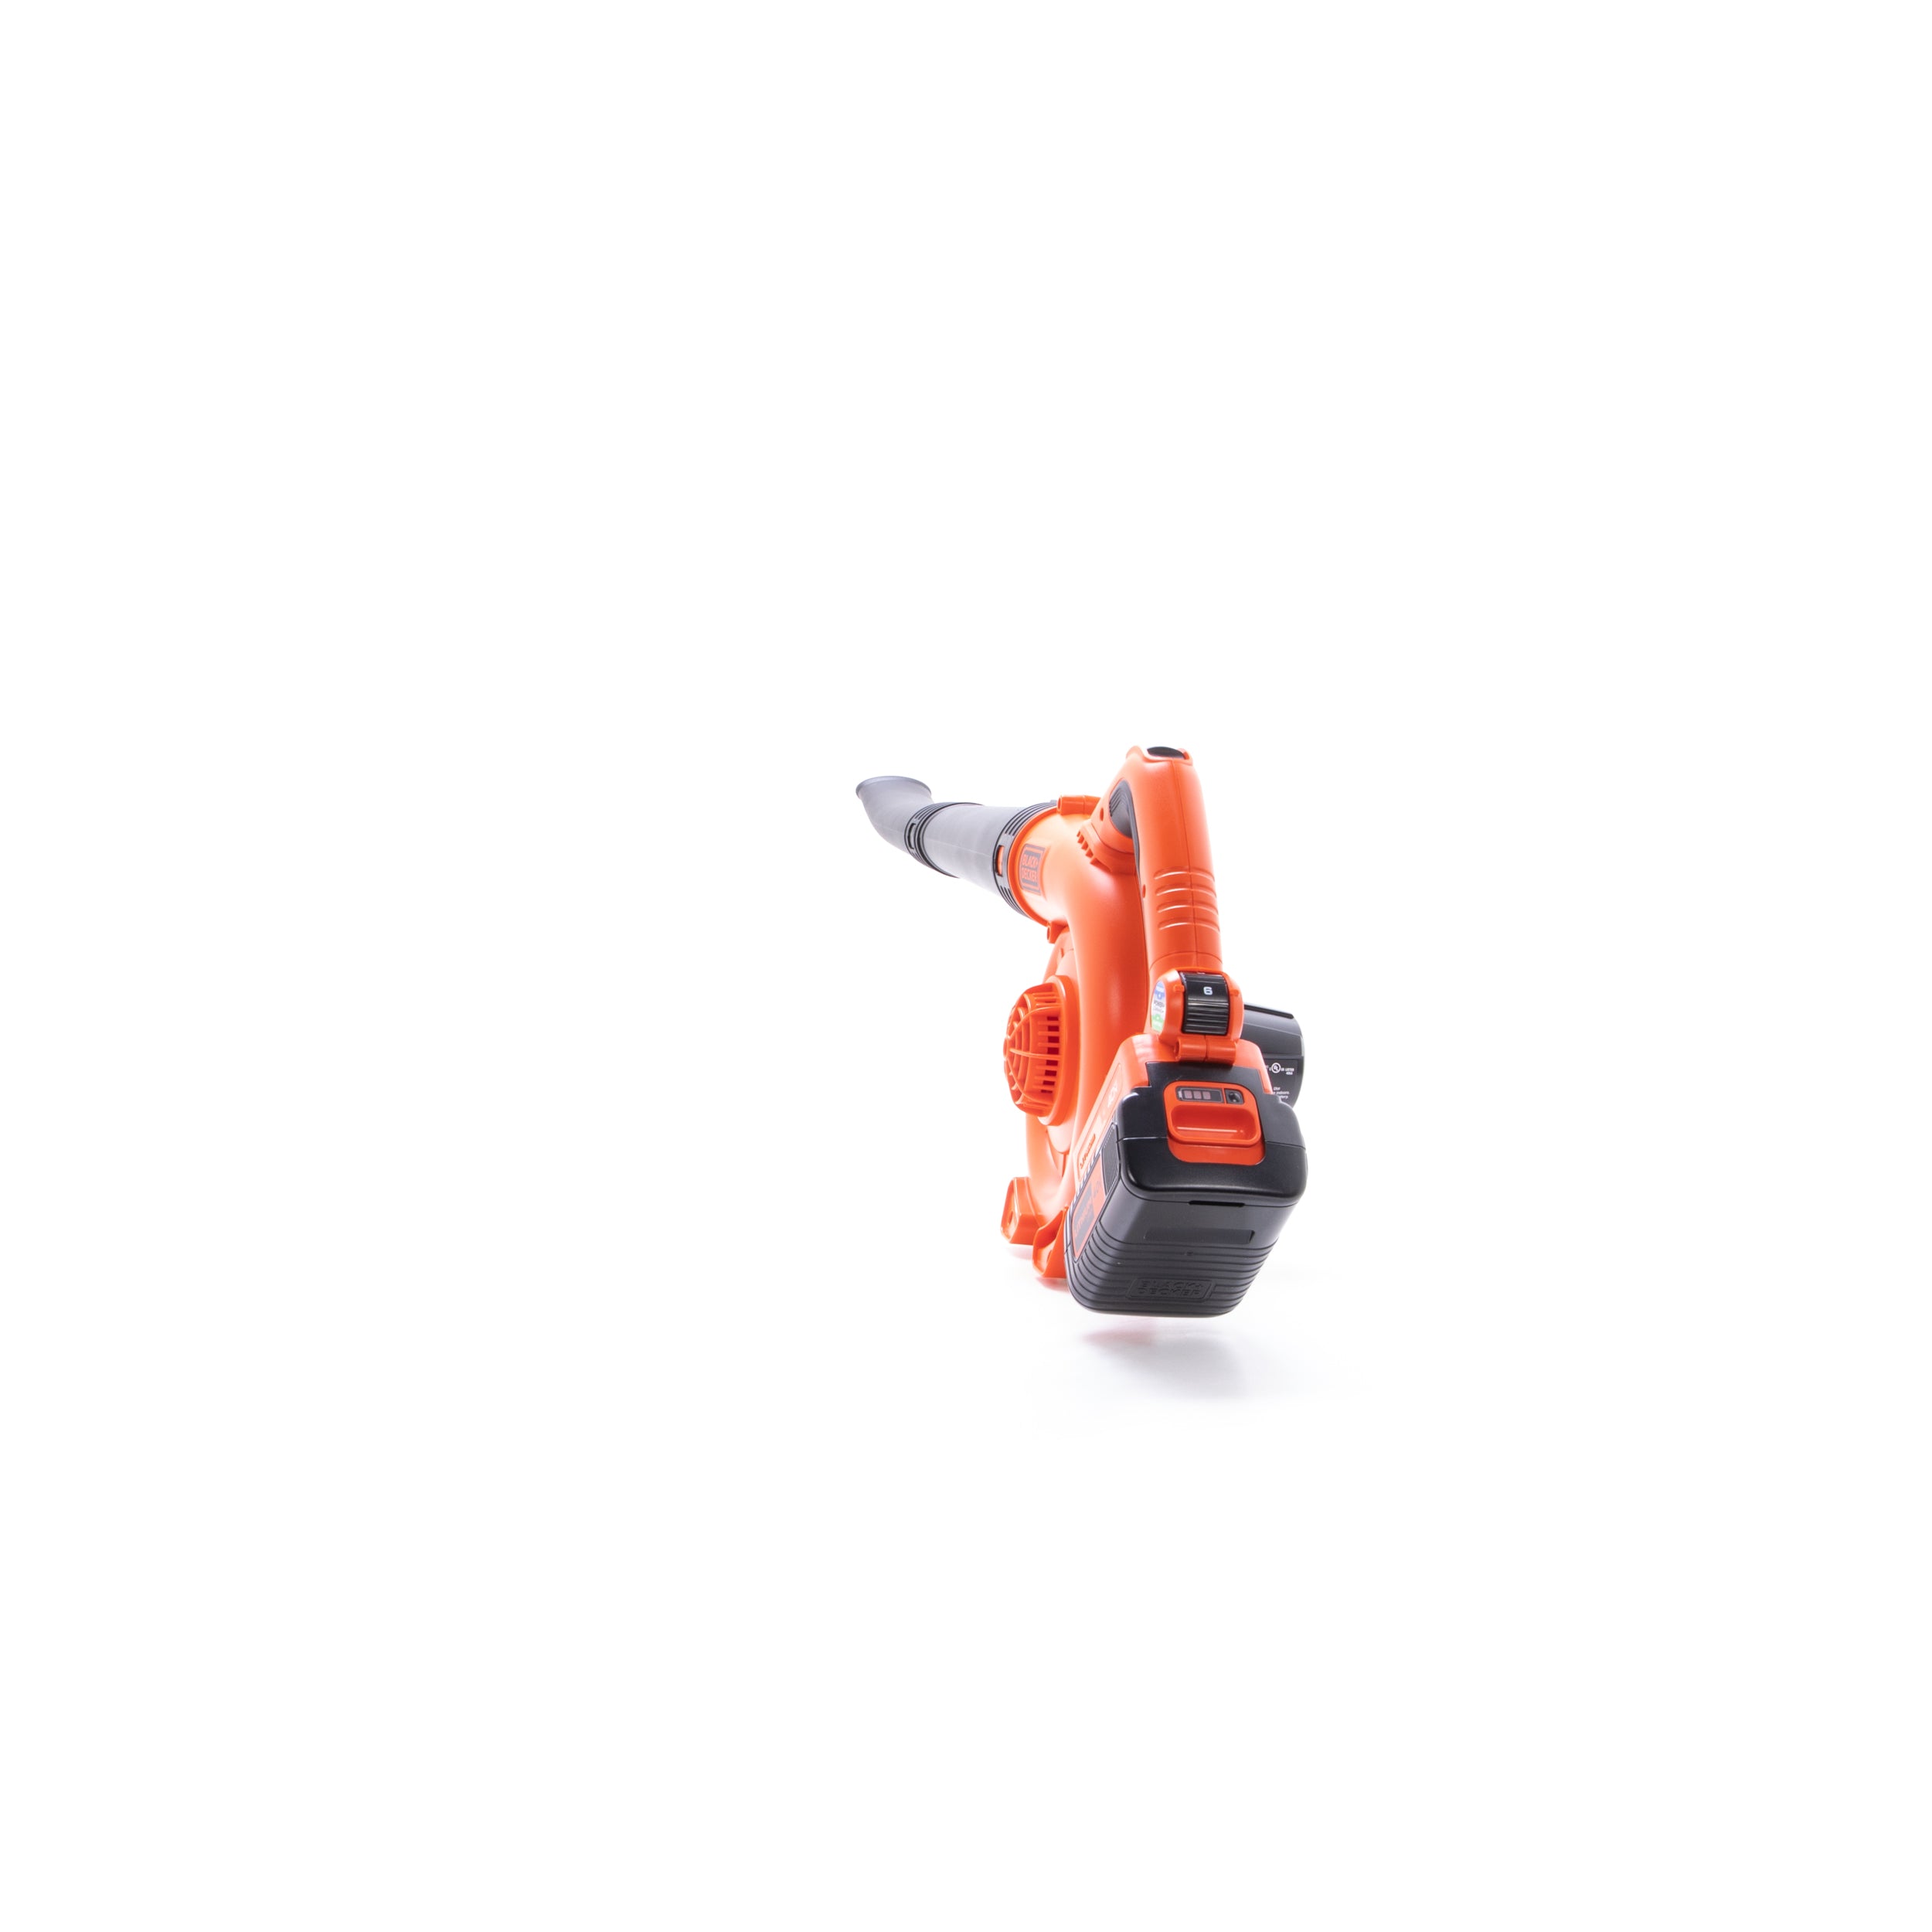 Black & Decker LSW36 40V Lithium Ion Cordless Sweeper,Tool Only 26x14x12